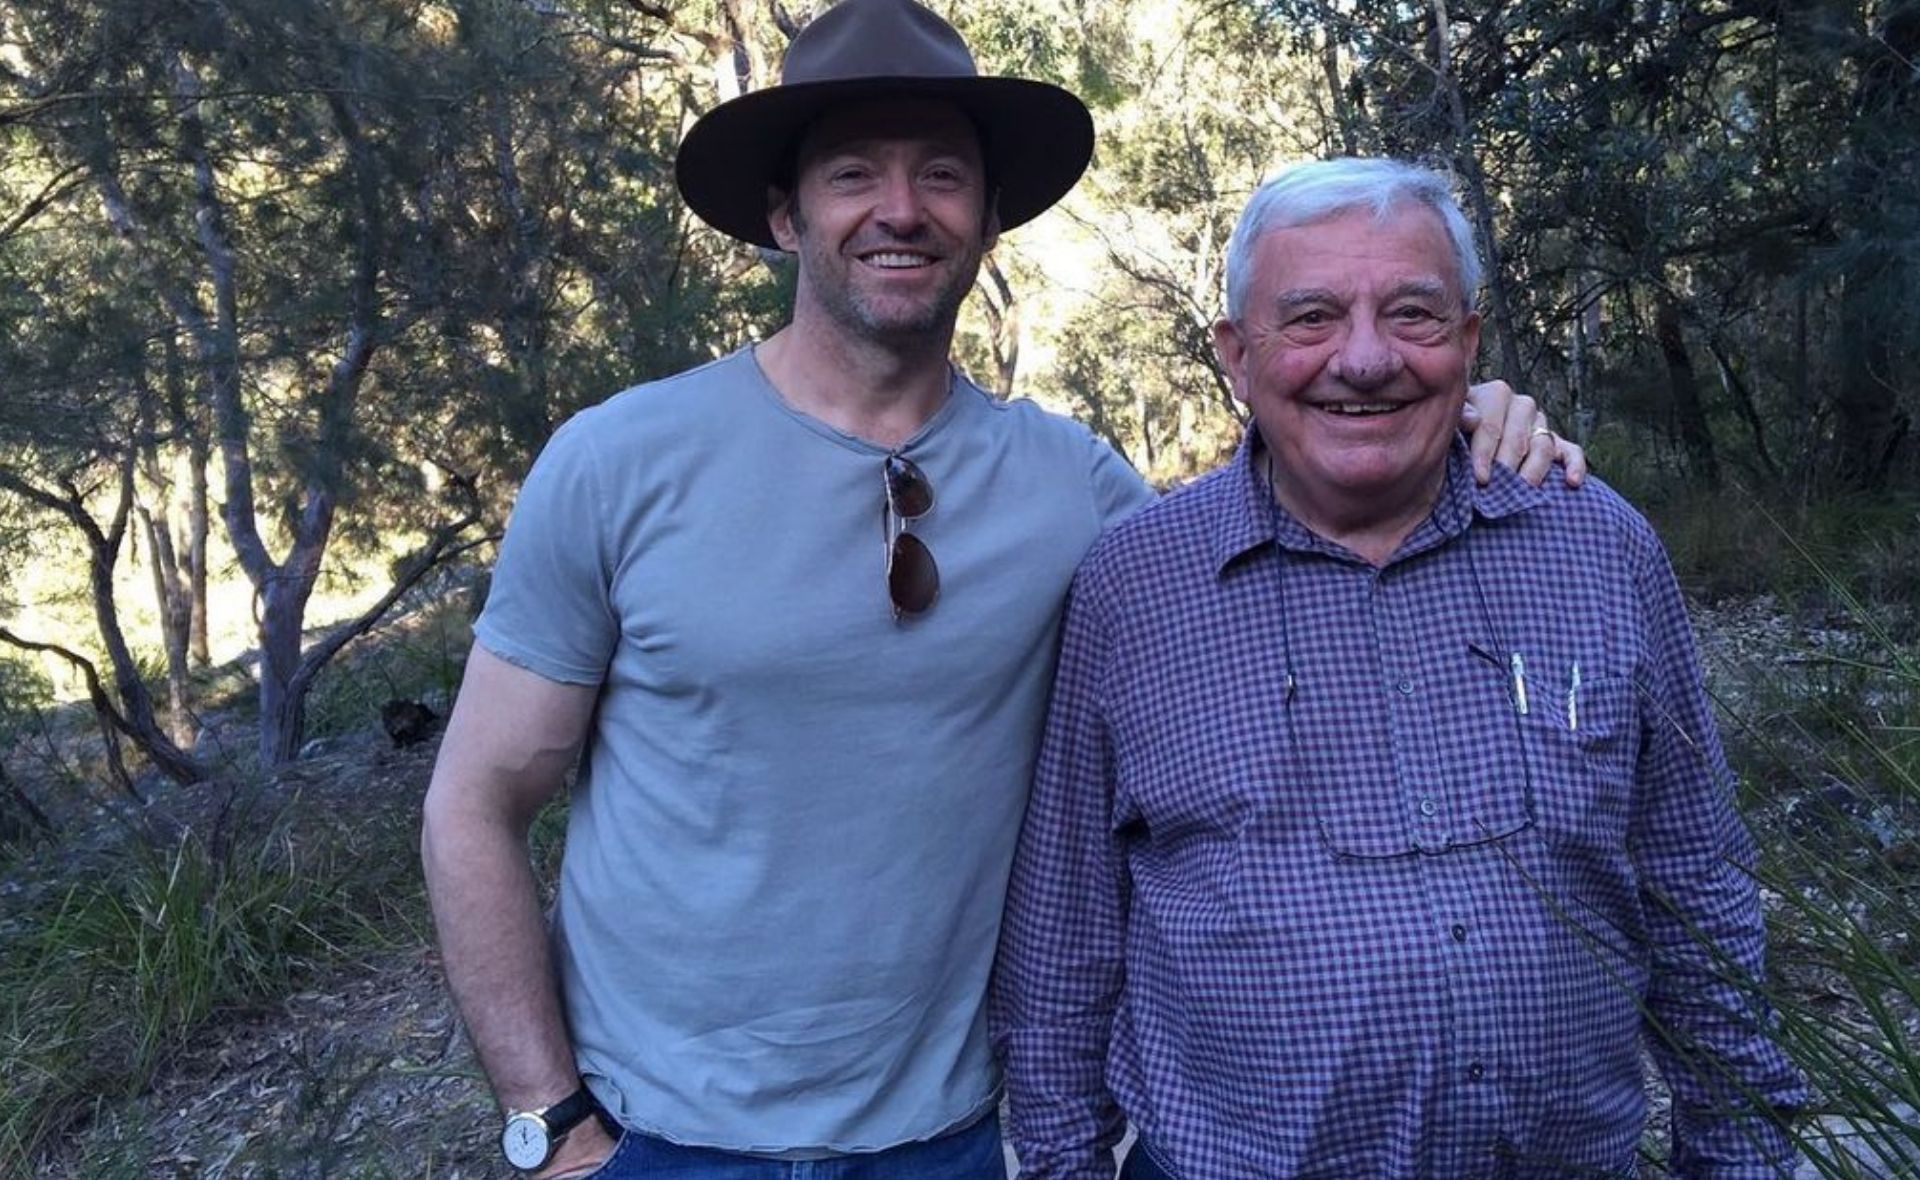 Hugh Jackman announces the tragic loss of his father Christopher, who passed away on Father’s Day